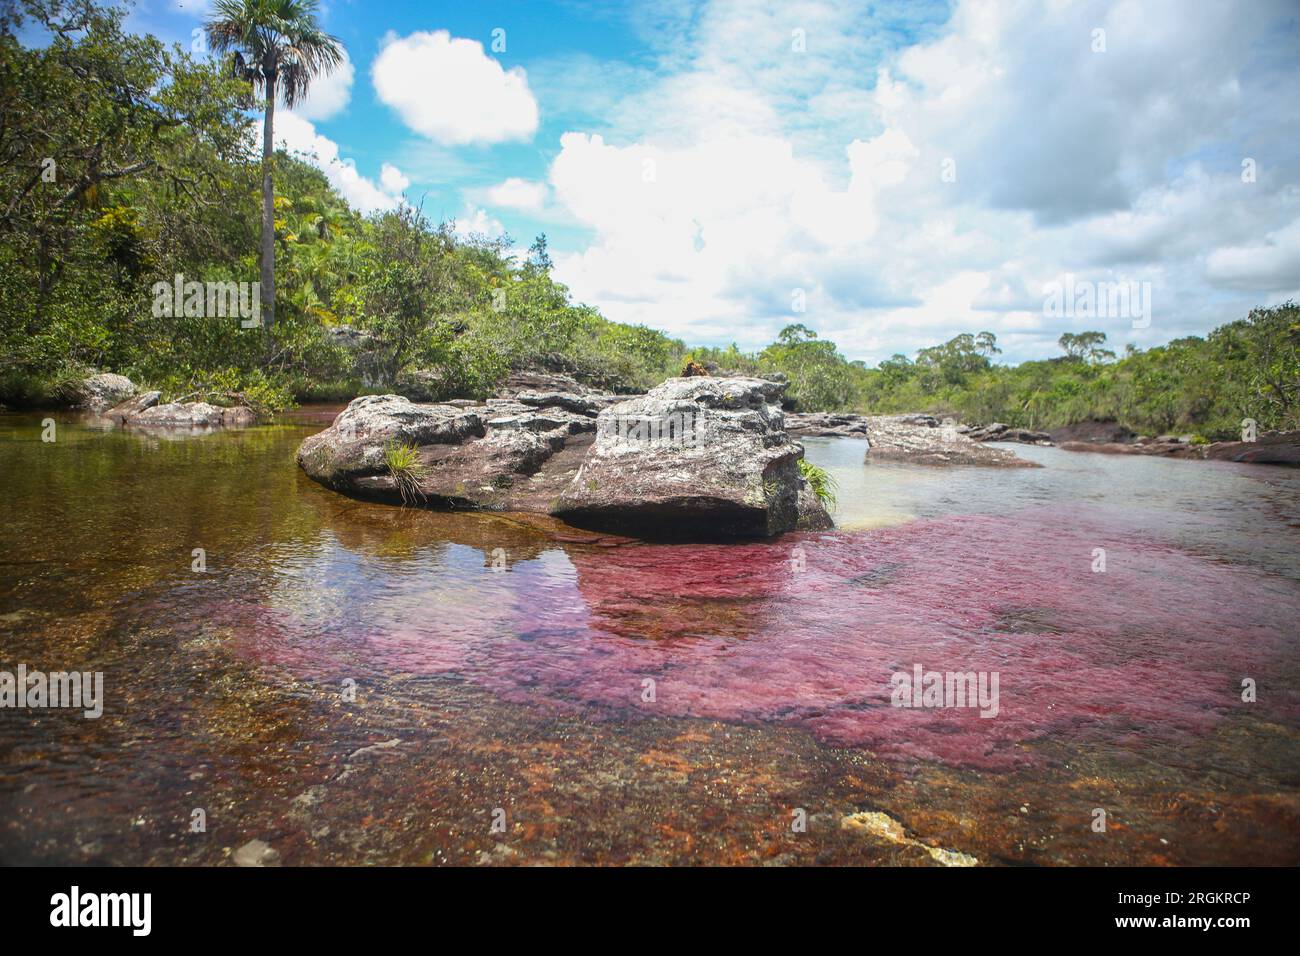 Caño Cristales, also known as the River of Five Colors, is a Colombian river located in the Serranía de la Macarena, an isolated mountain range in the Stock Photo